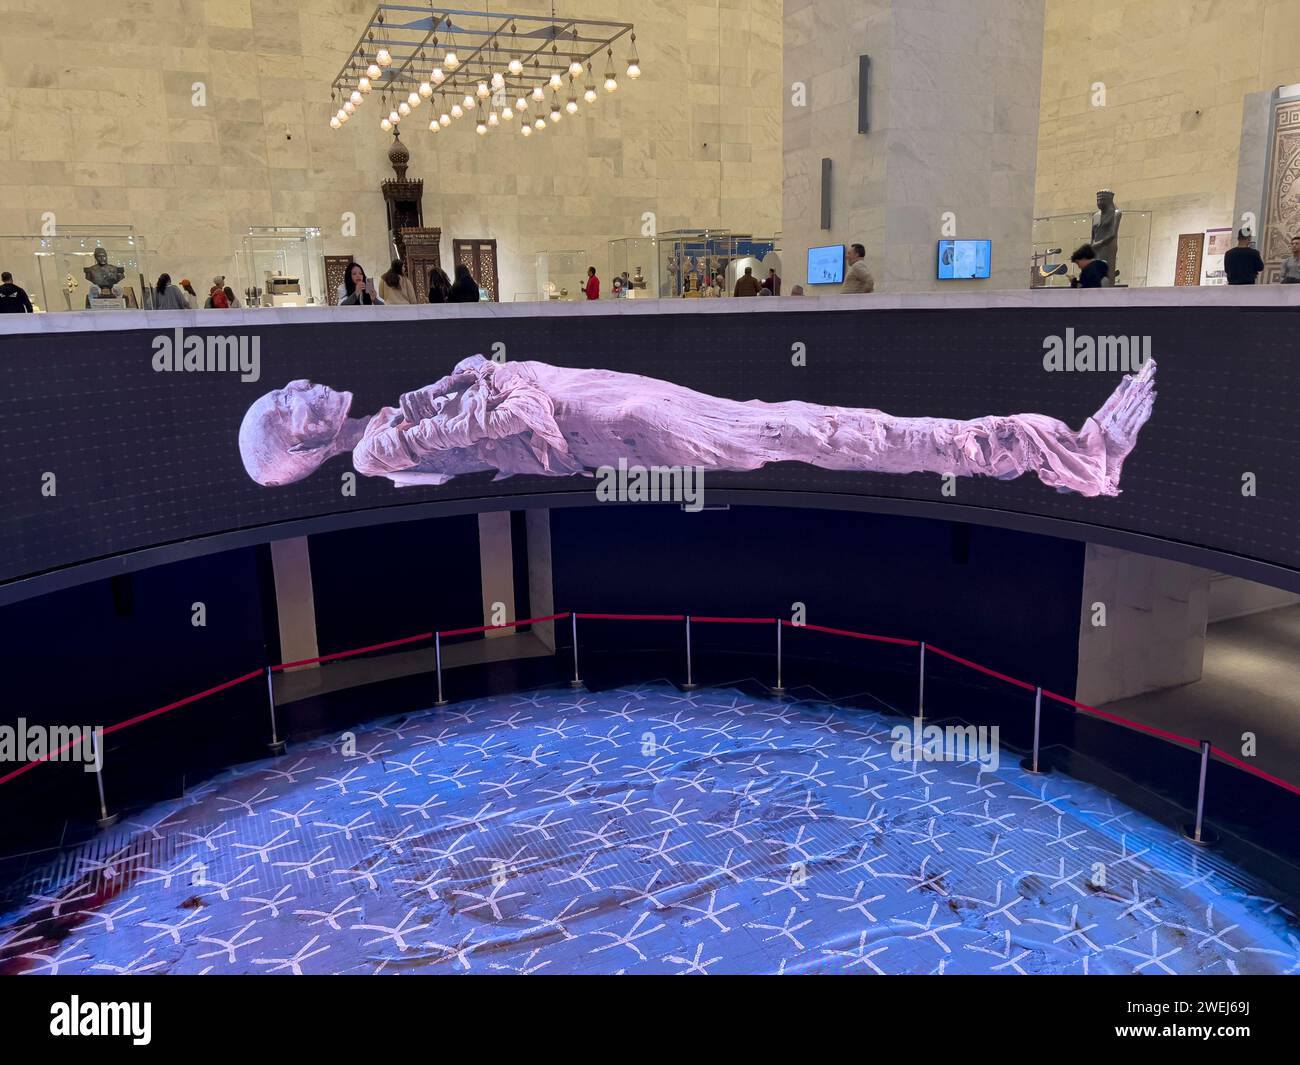 Holographic image of one of the mummies on display at the Egyptian Museum, Nile River, Cairo, Egypt. Stock Photo